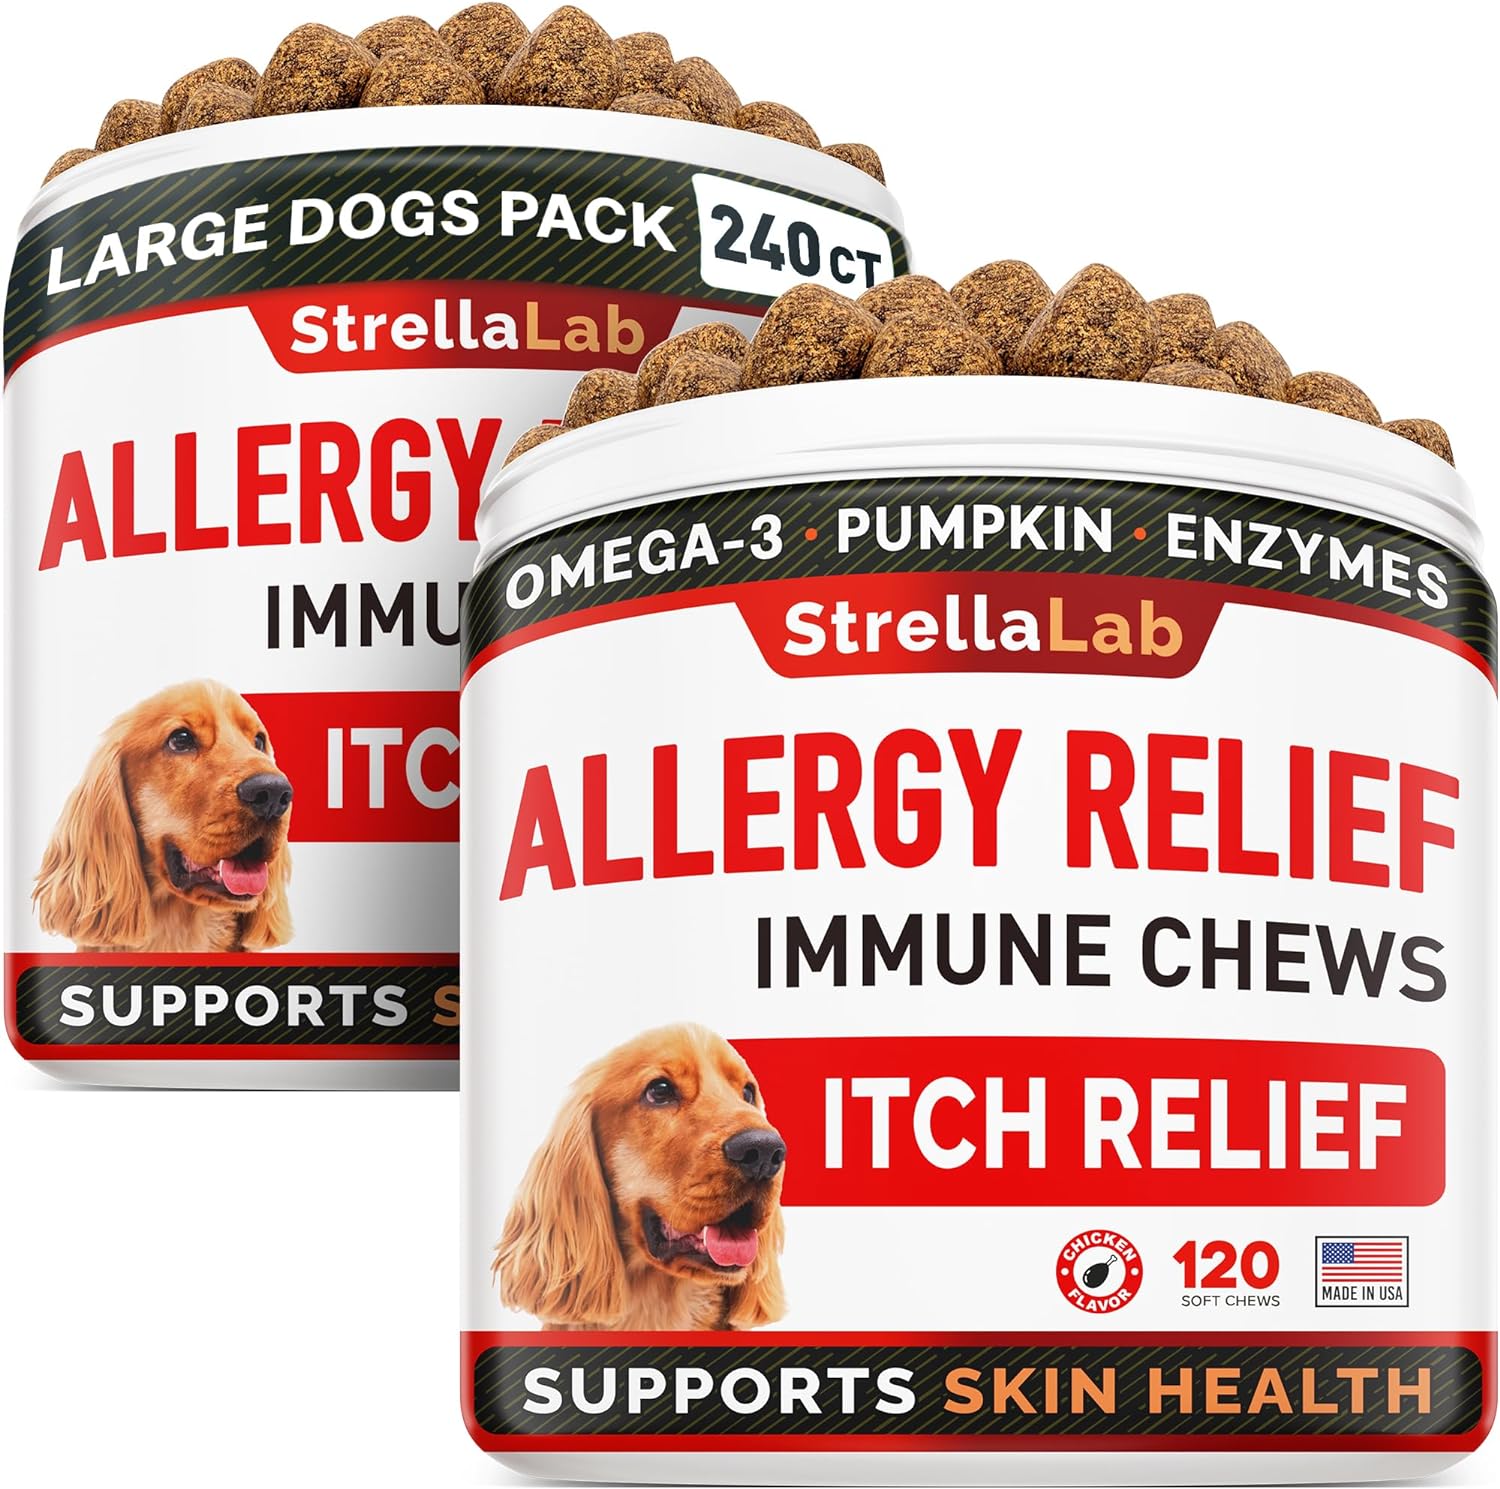 STRELLALAB Dog Allergy Relief 2 Packs (240 Chews) - Dog Itchy Skin Treatment + Omega 3 & Pumpkin, Dog Allergy Chews & Anti Itch Support Supplement, Dogs Itching & Licking Treats, Dog Itch Relief Chew